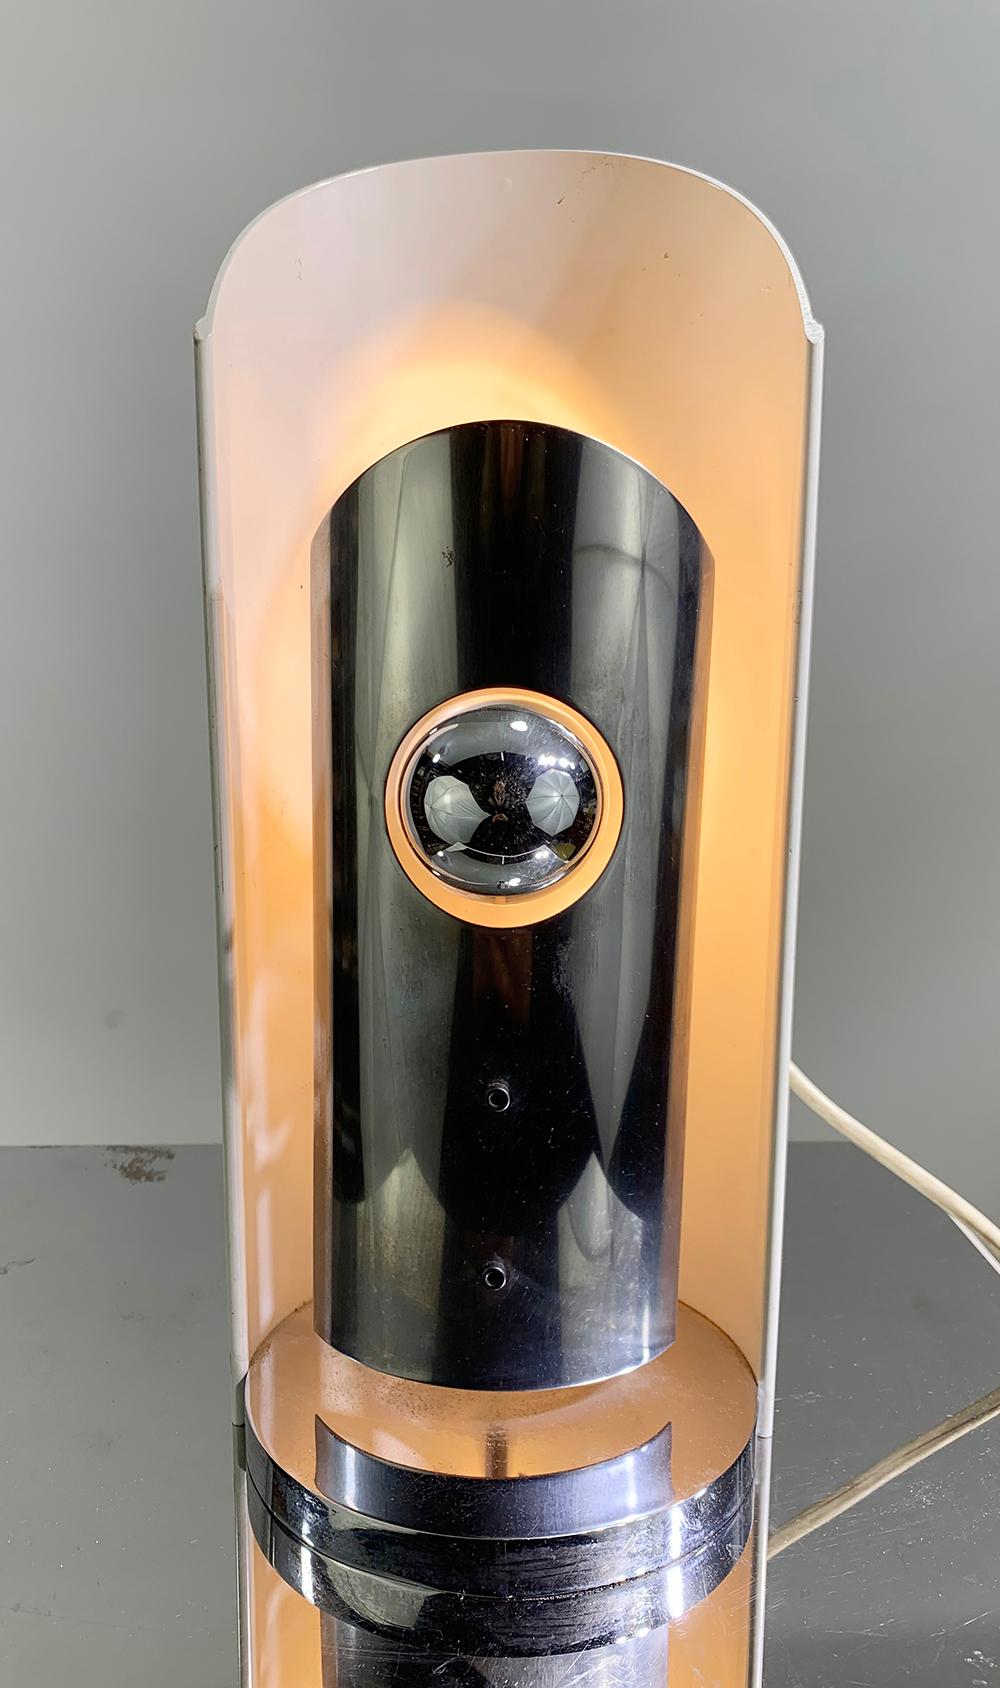 Mid-century magnificent space age table lamp in chrome with it's cylindrical shape circa 1970
Can be wired and delivered for European or US users.